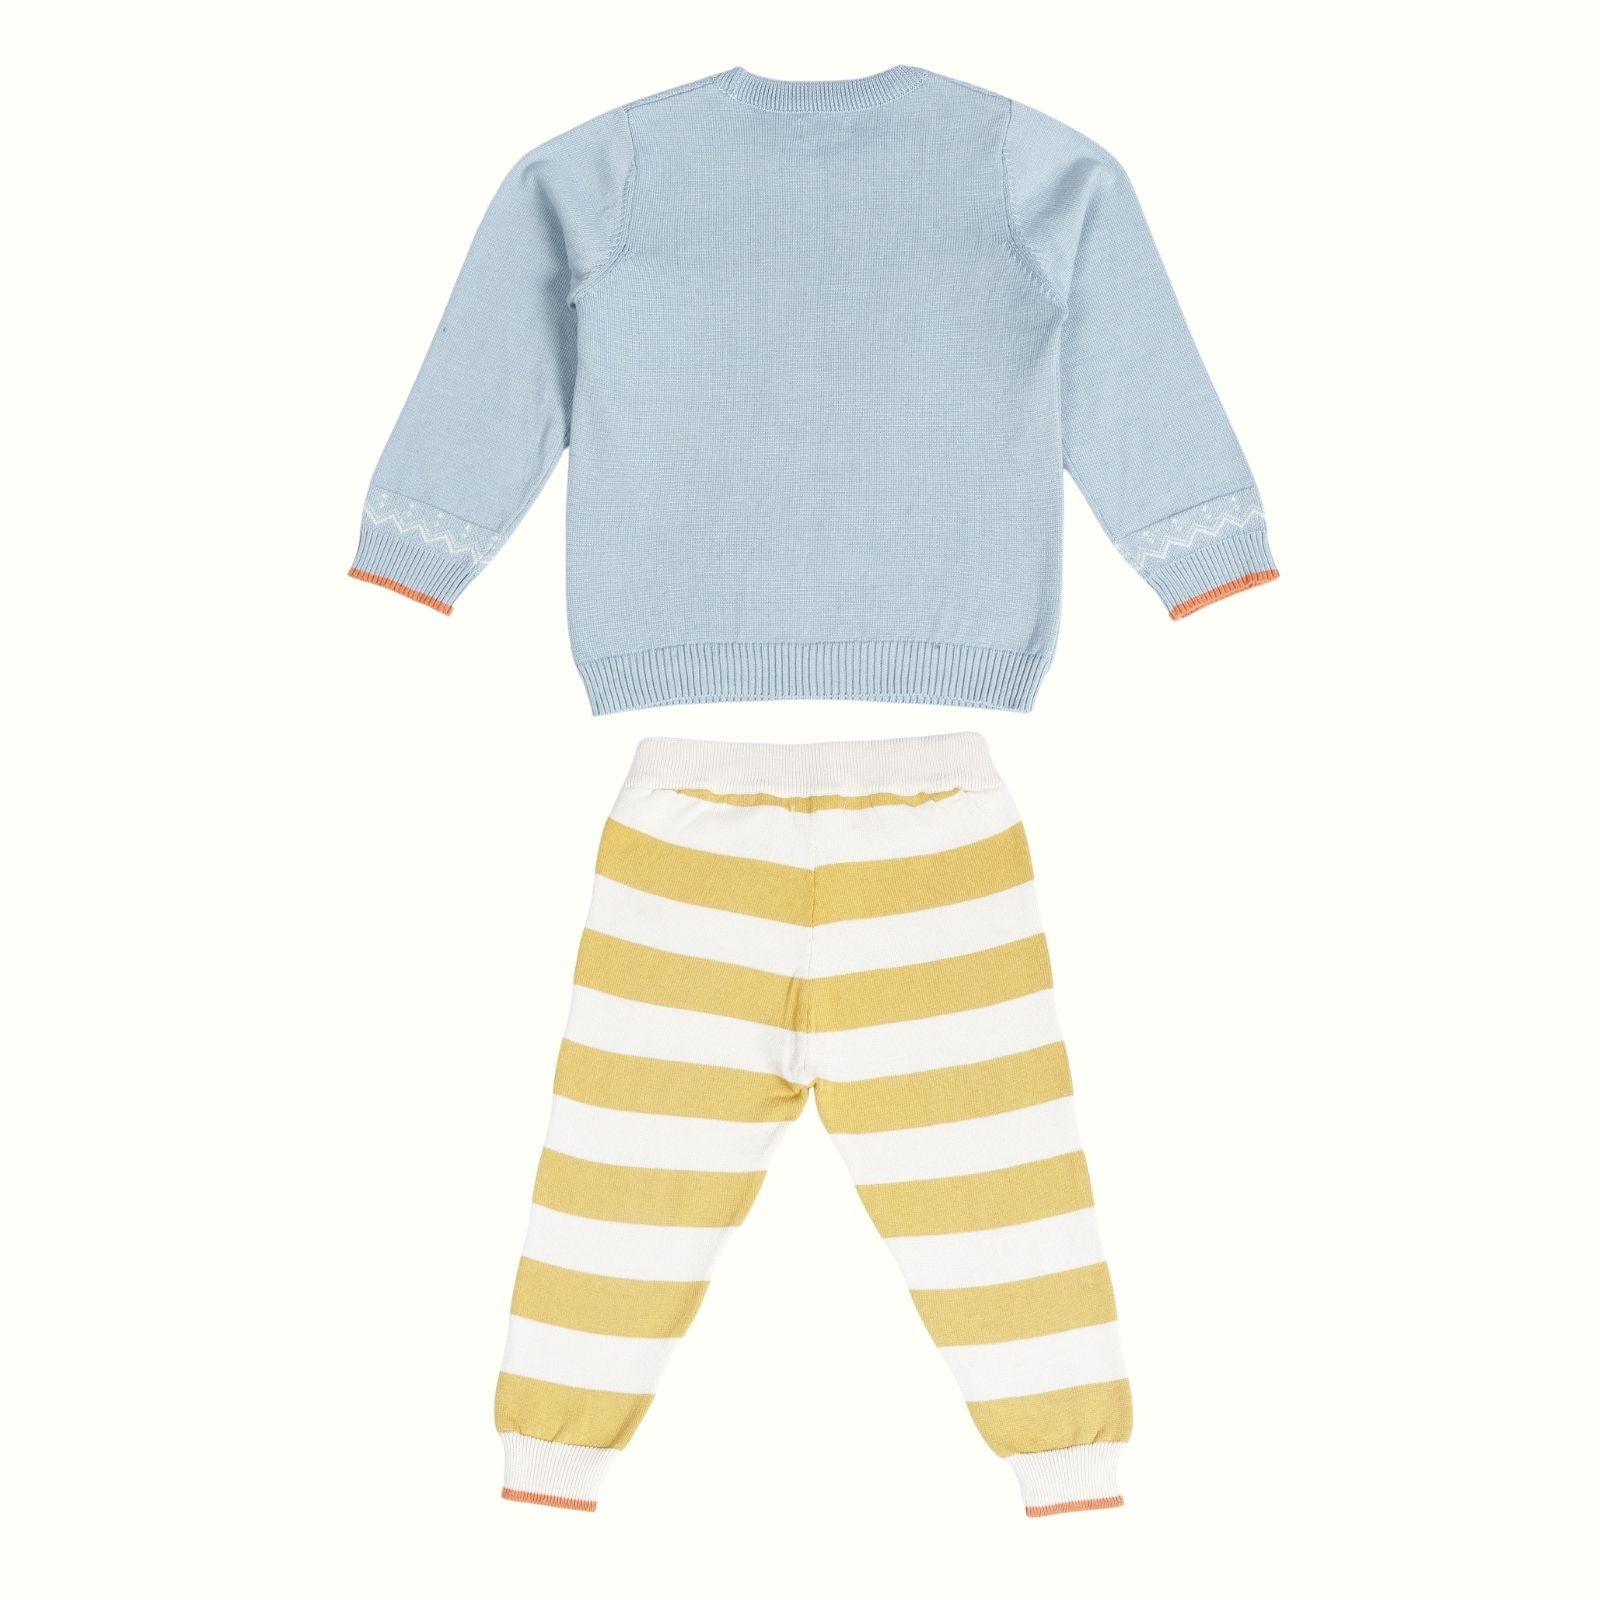 Greendeer Delighted Lion Jacquard 100% Cotton Sweater with Lower - Powder Blue & Mimosa Yellow - Set of 2